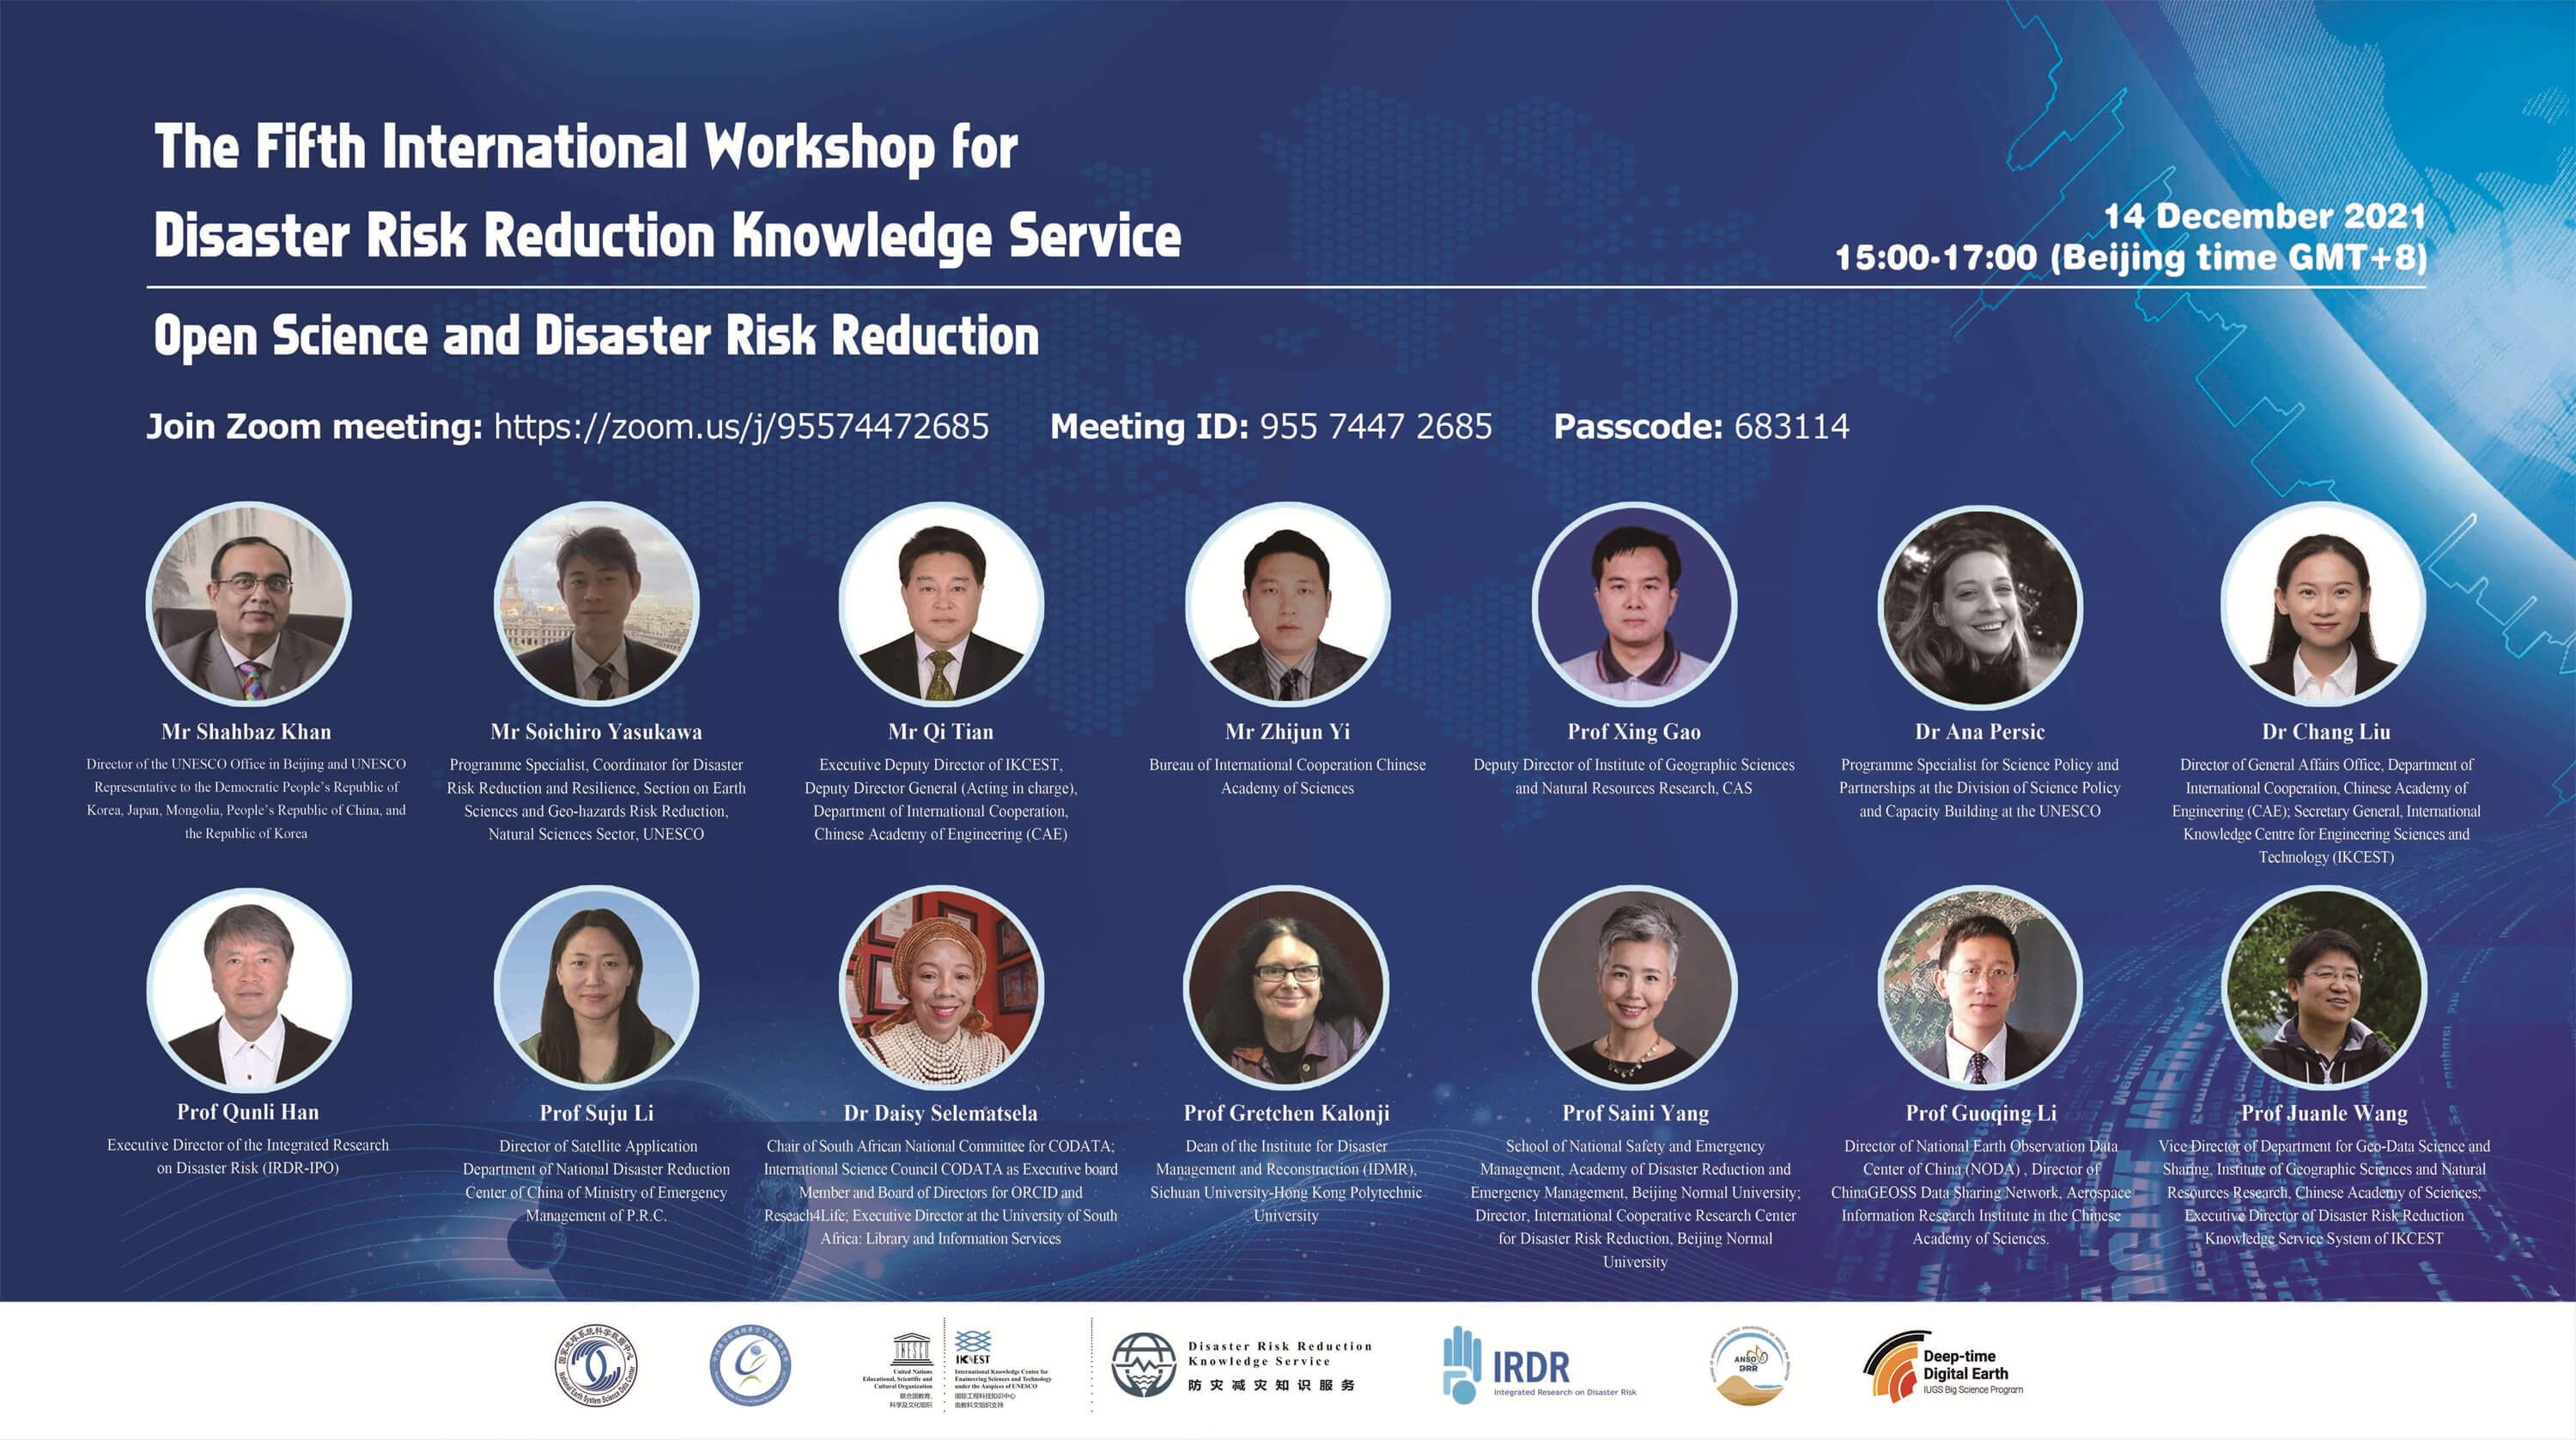 The Fifth International Workshop for Disaster Risk Reduction Knowledge Service